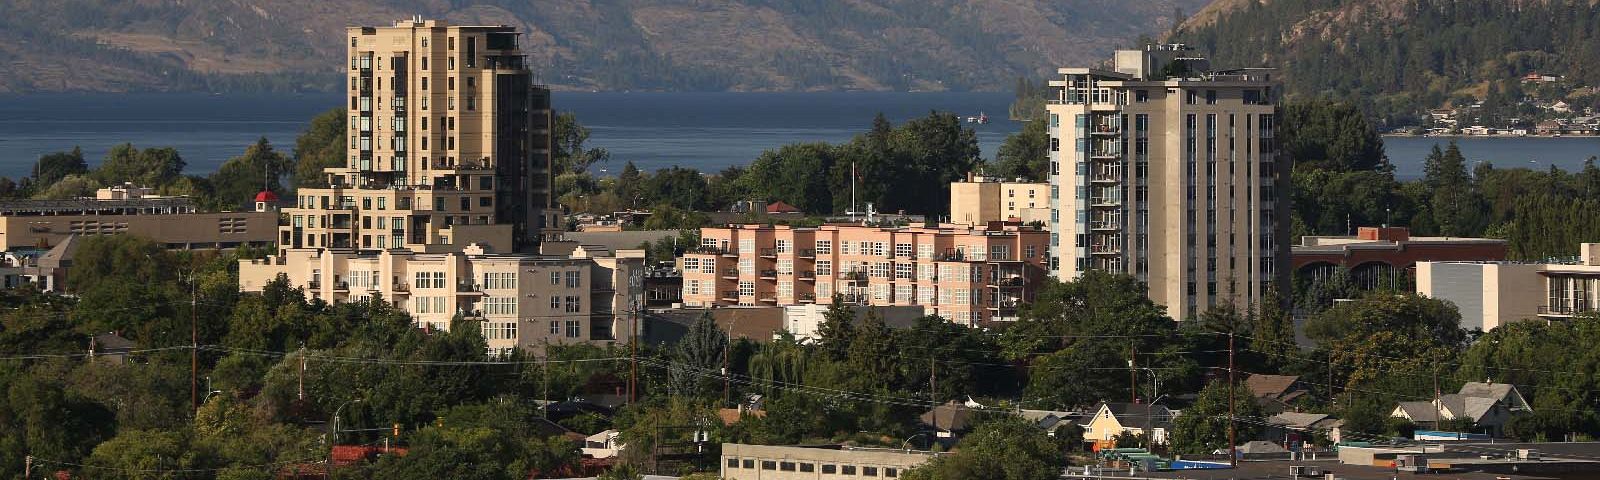 Okanagan Residential Sales Typical for Fall Time